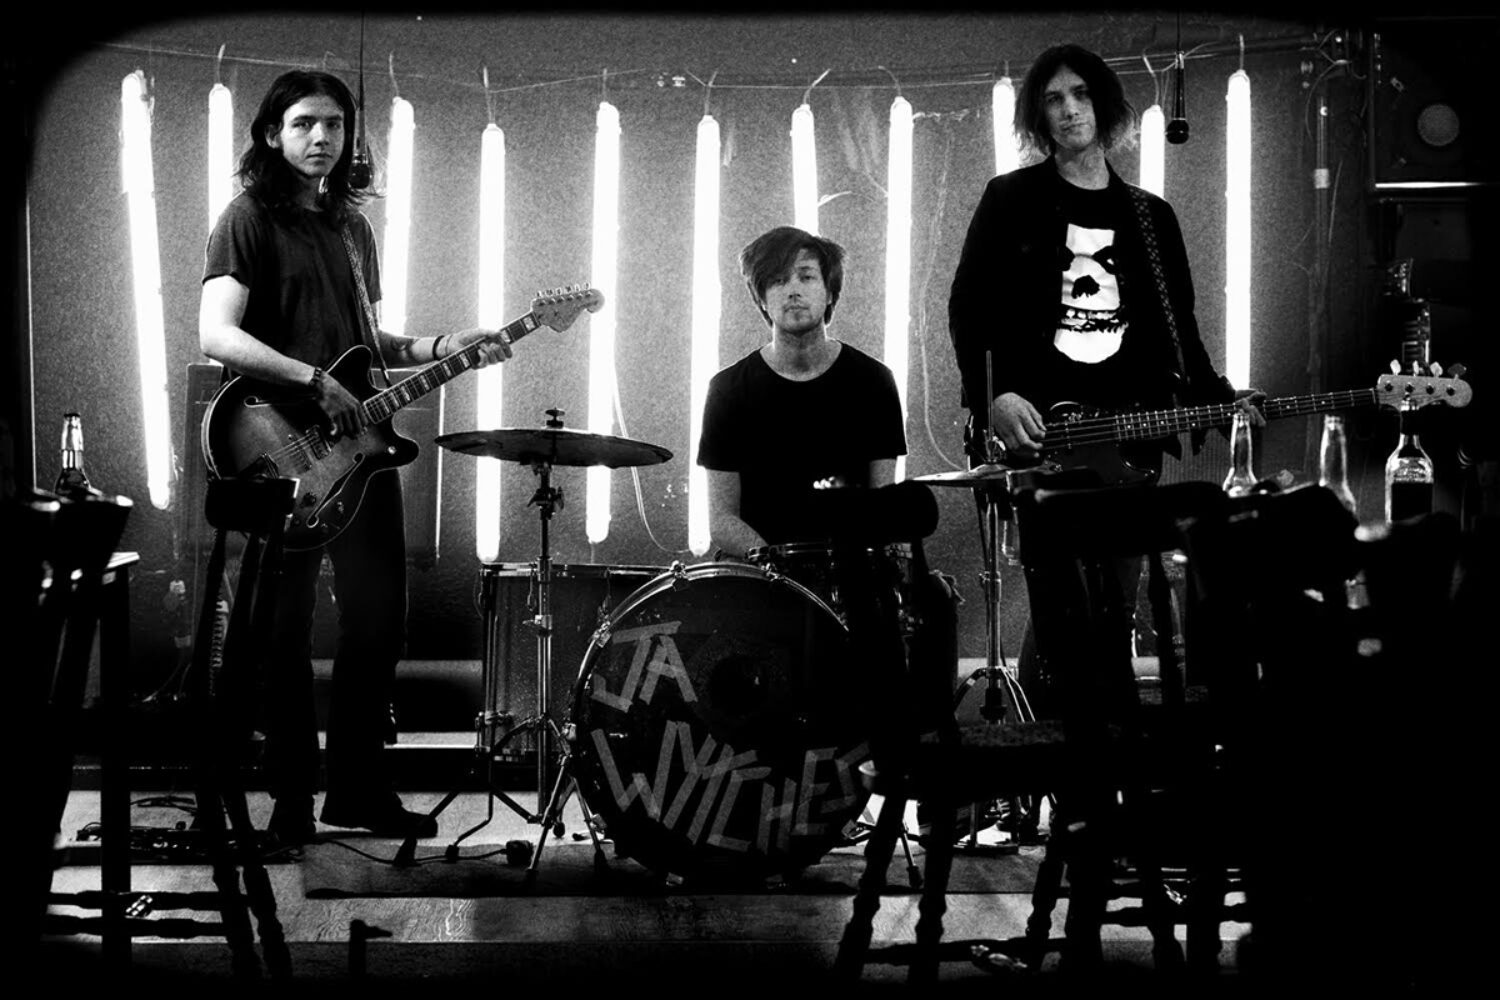 Win tickets to see The Wytches play the Dr. Martens Stand For Something Tour